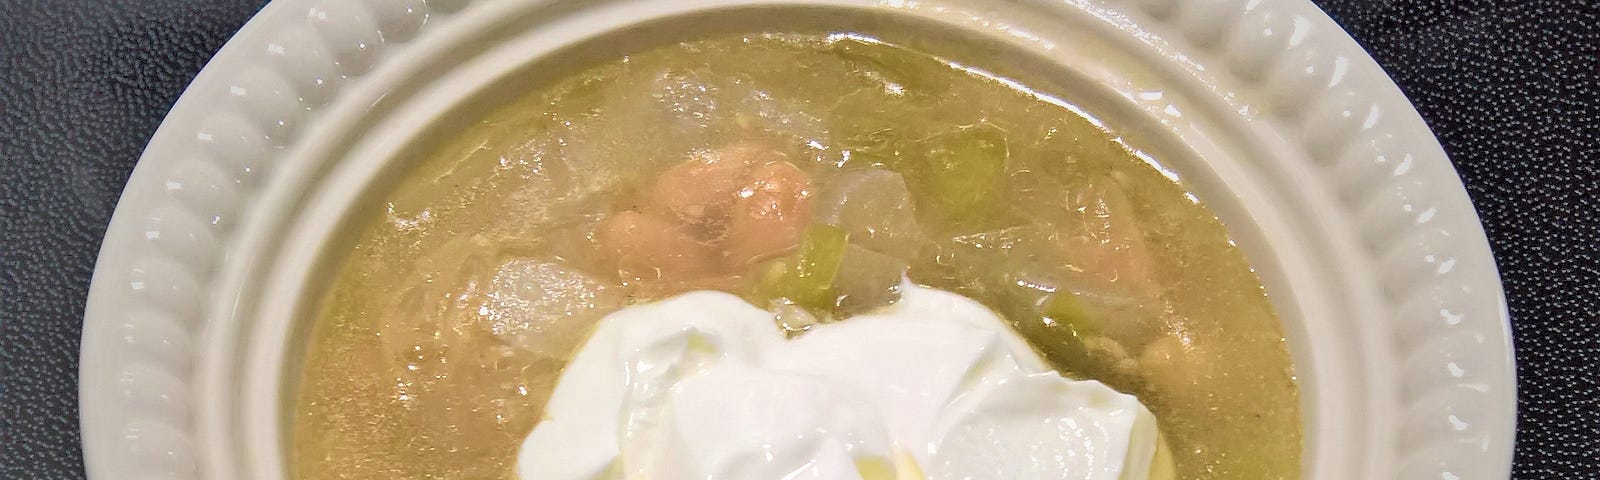 White Bean, Leek, and Tomatillo Soup garnished with Sour Cream